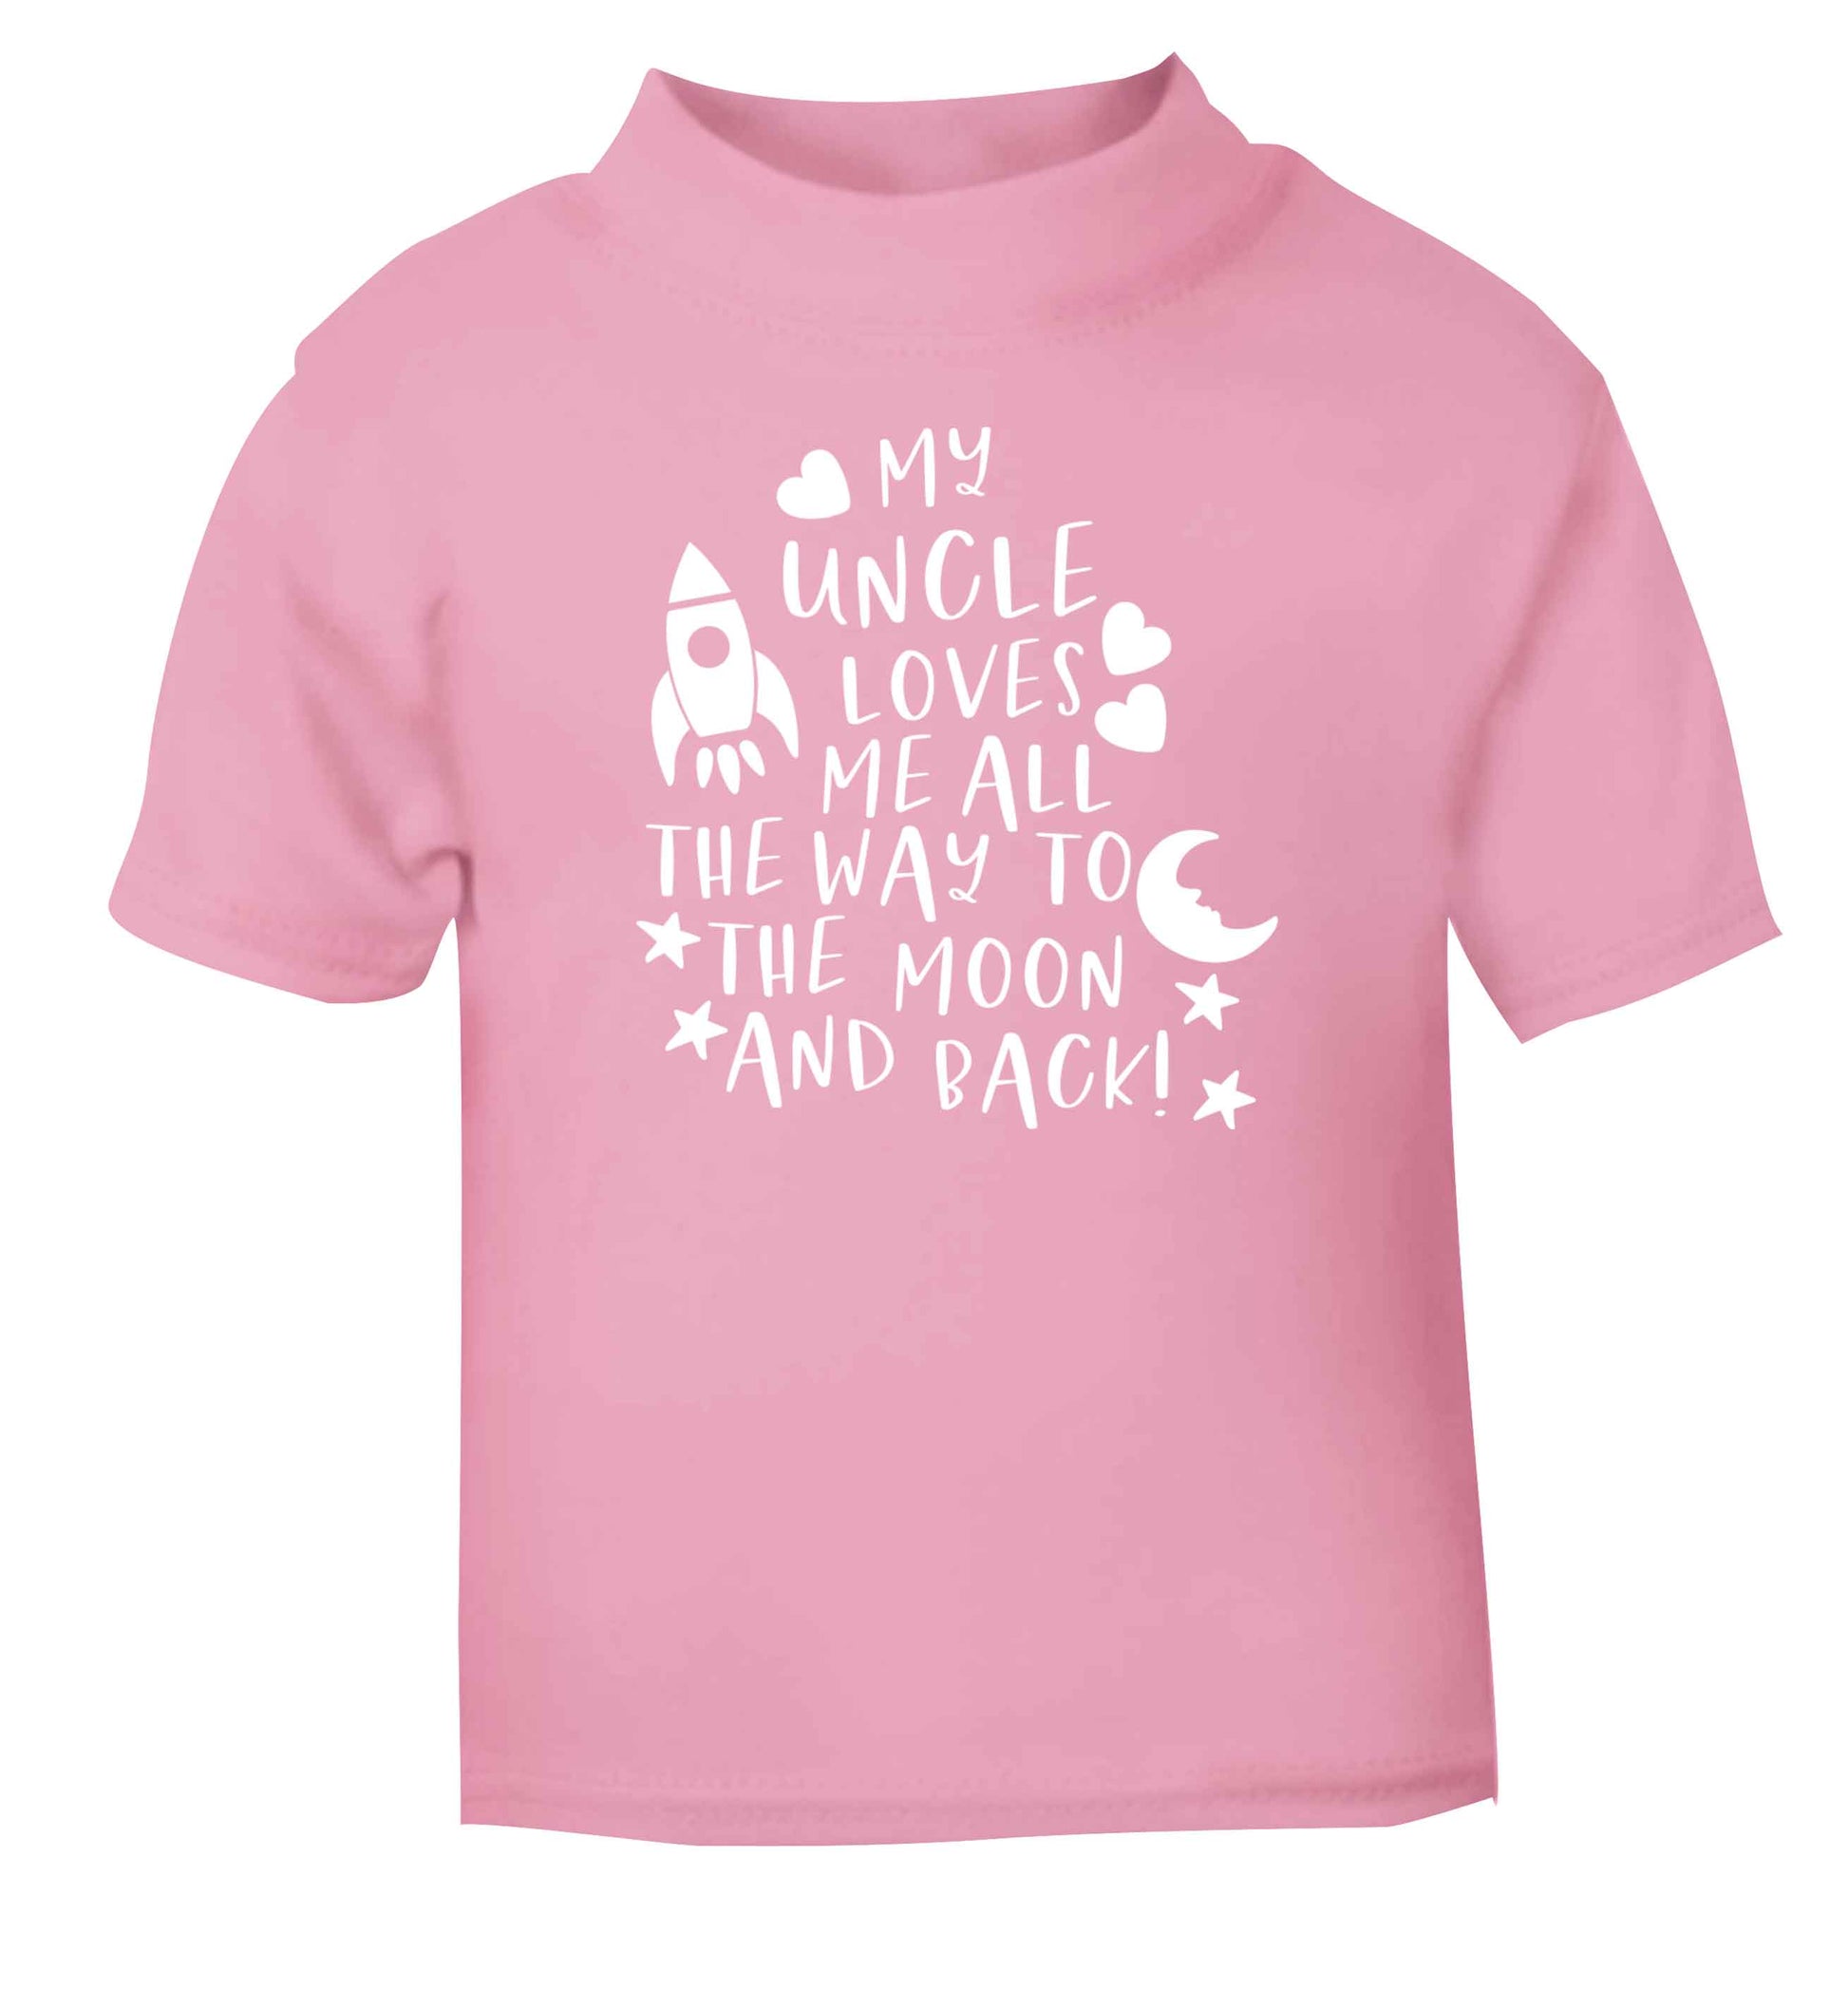 My uncle loves me all the way to the moon and back light pink Baby Toddler Tshirt 2 Years